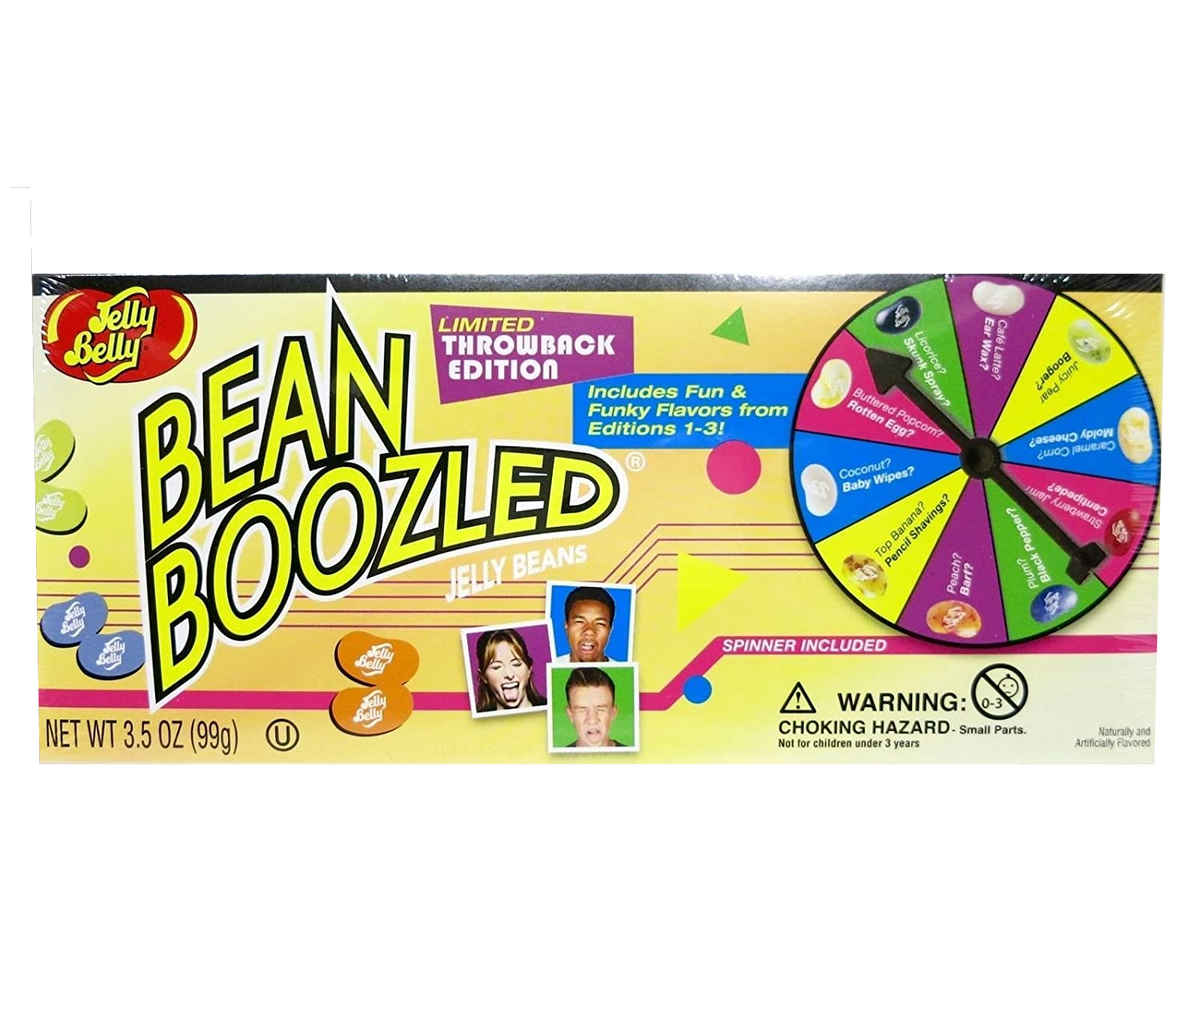 BeanBoozled: Limited Throwback Edition, Jelly Belly Wiki